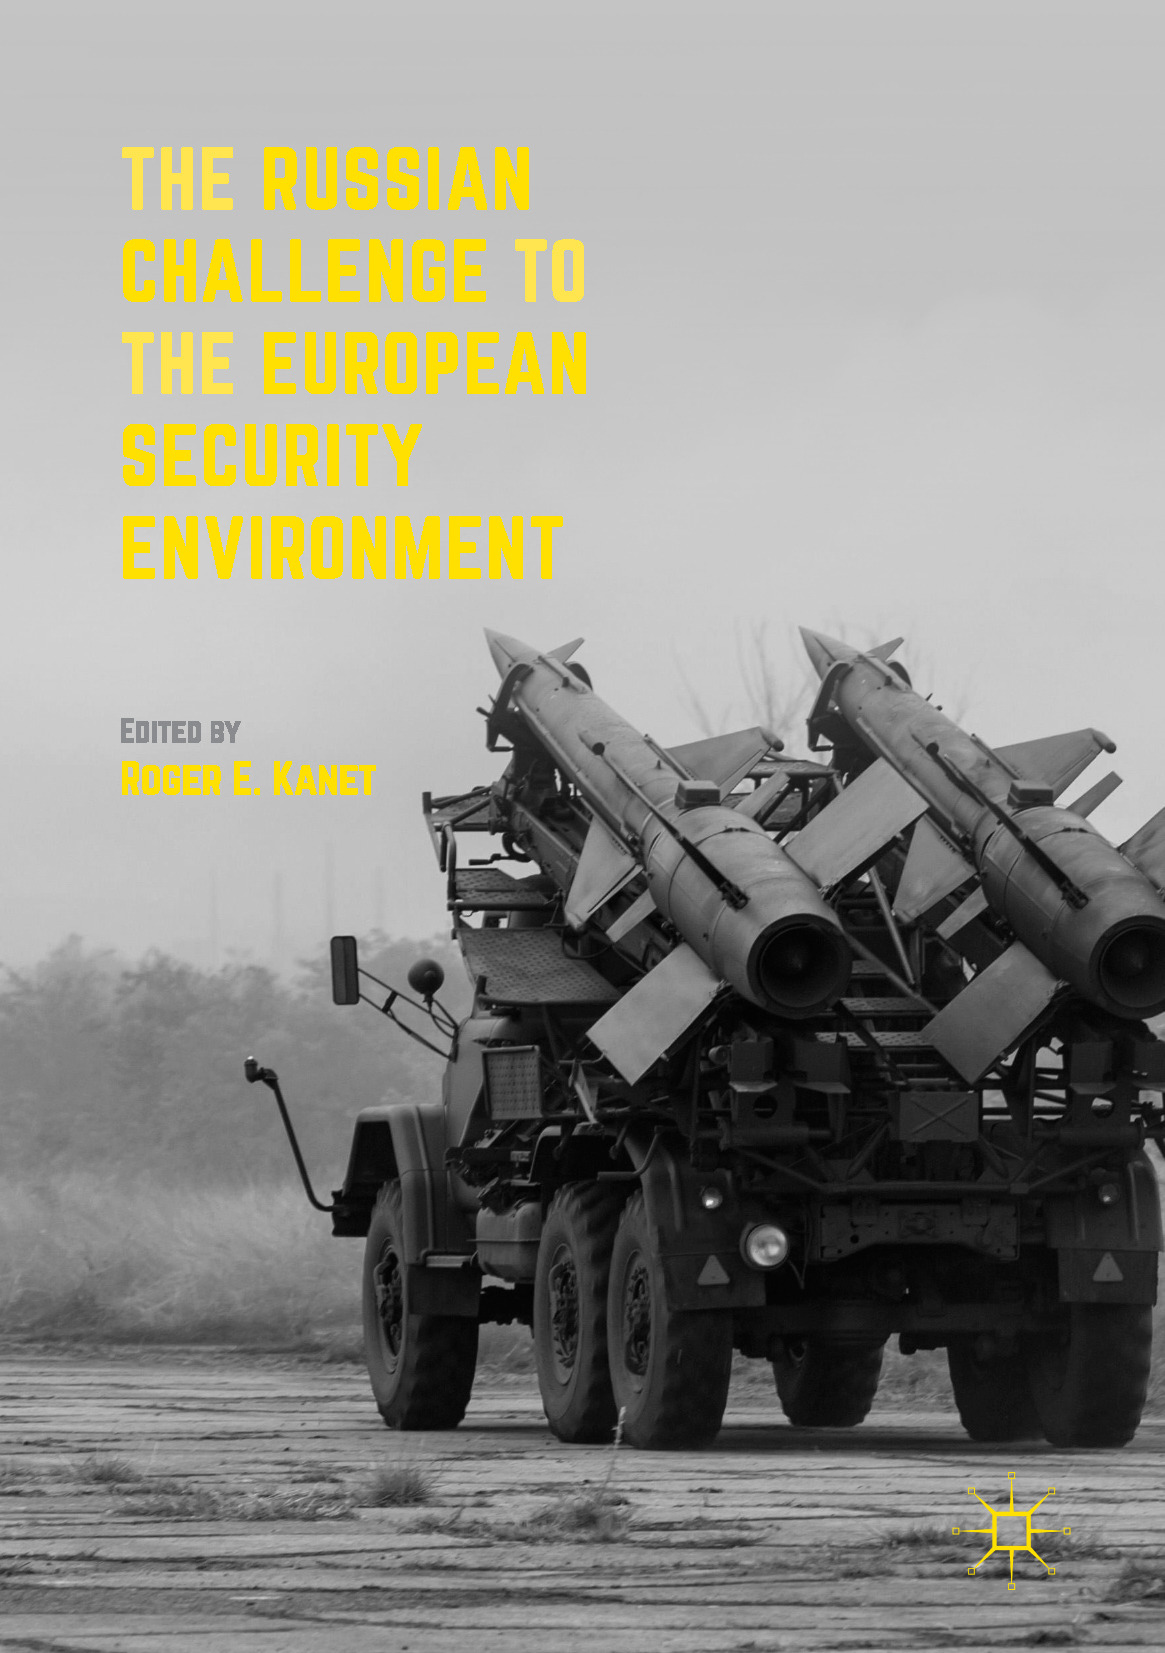 Kanet, Roger E. - The Russian Challenge to the European Security Environment, ebook